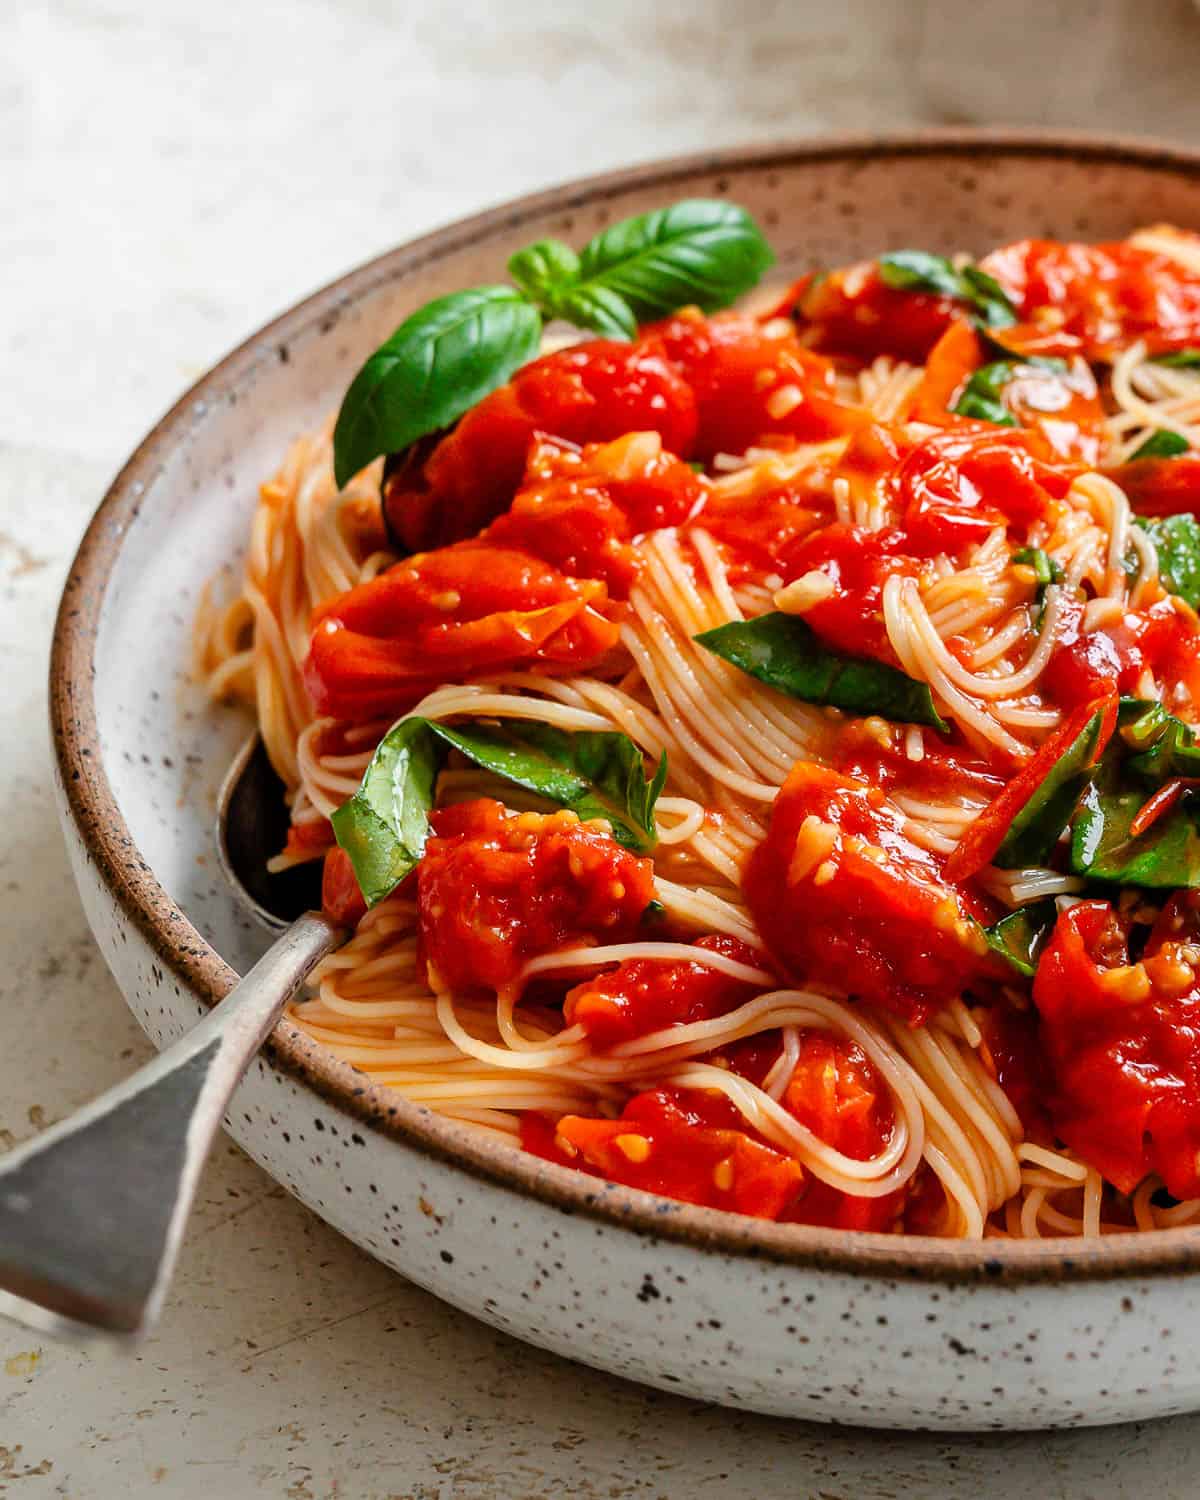 completed 15-Minute Cherry Tomato Basil Pasta in a bowl